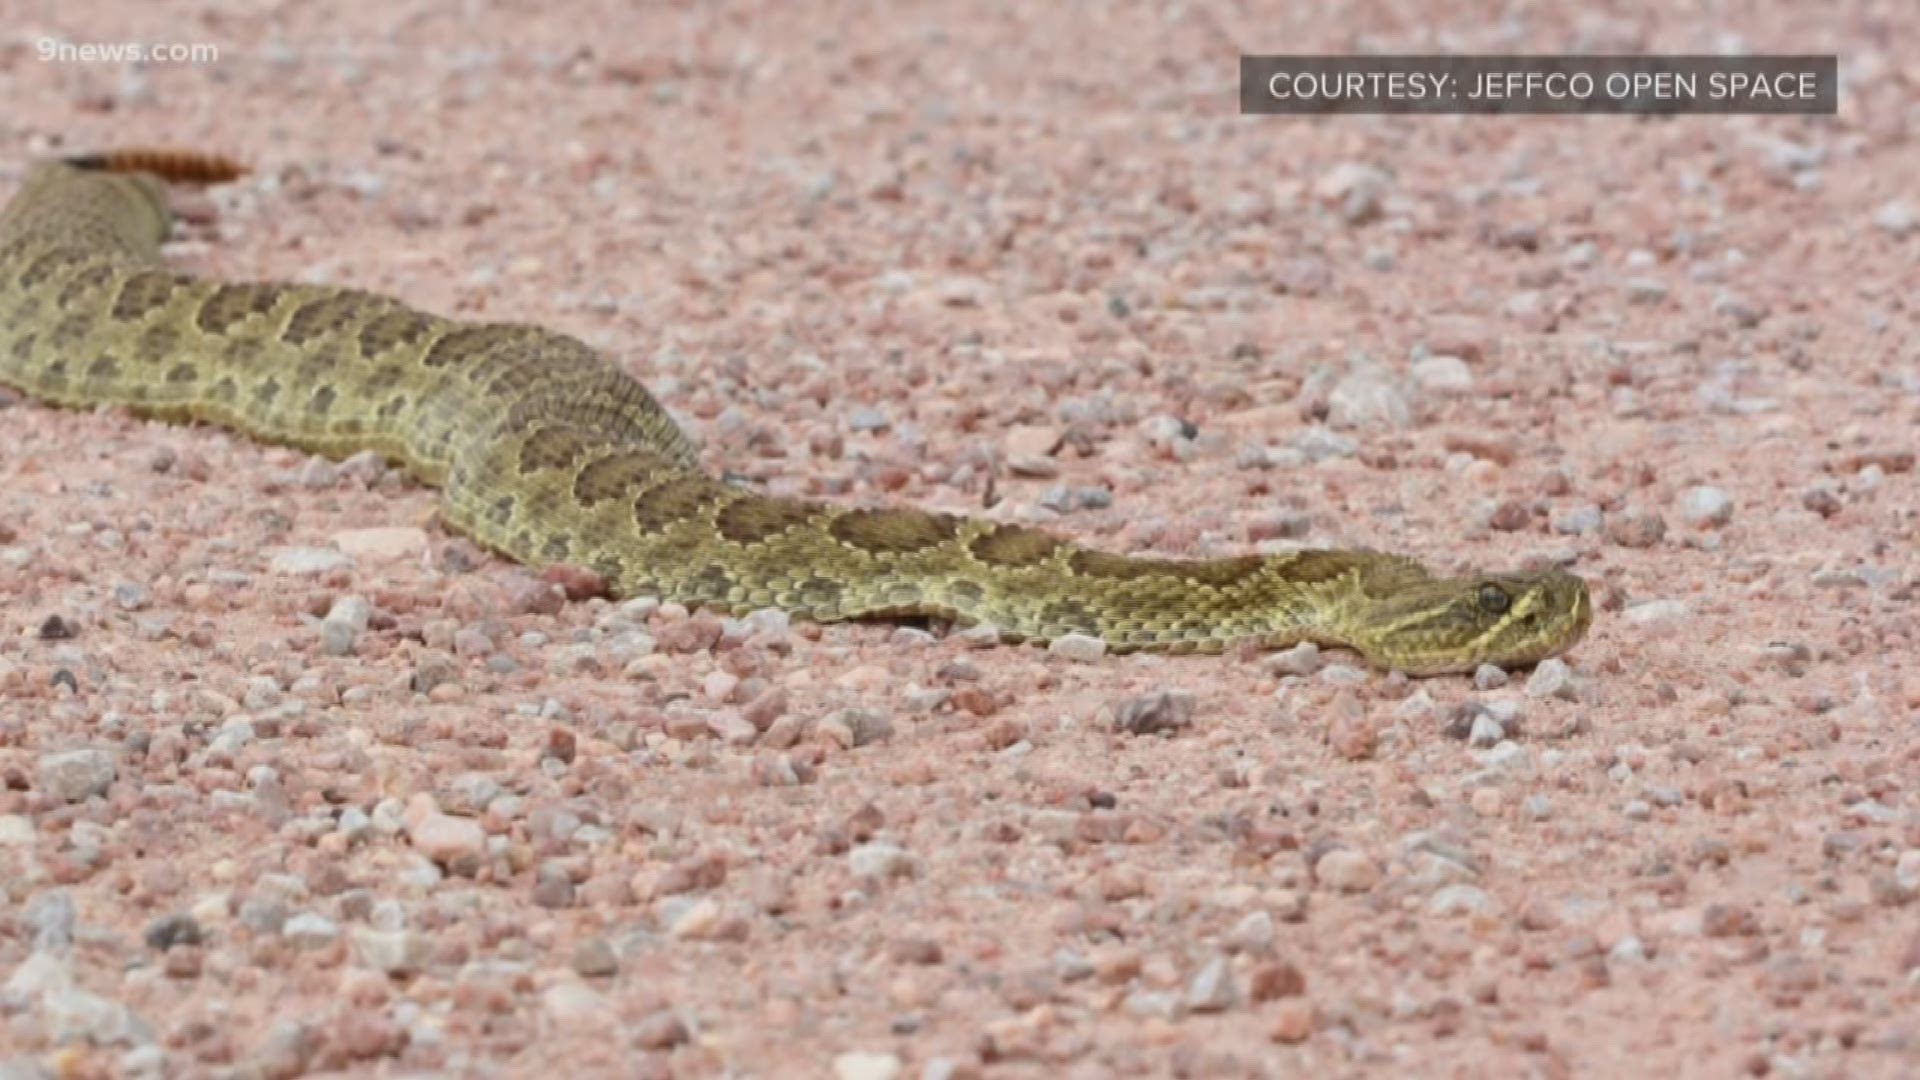 Rangers say there are four to five reported rattlesnake bites to dogs each year in Jefferson County.